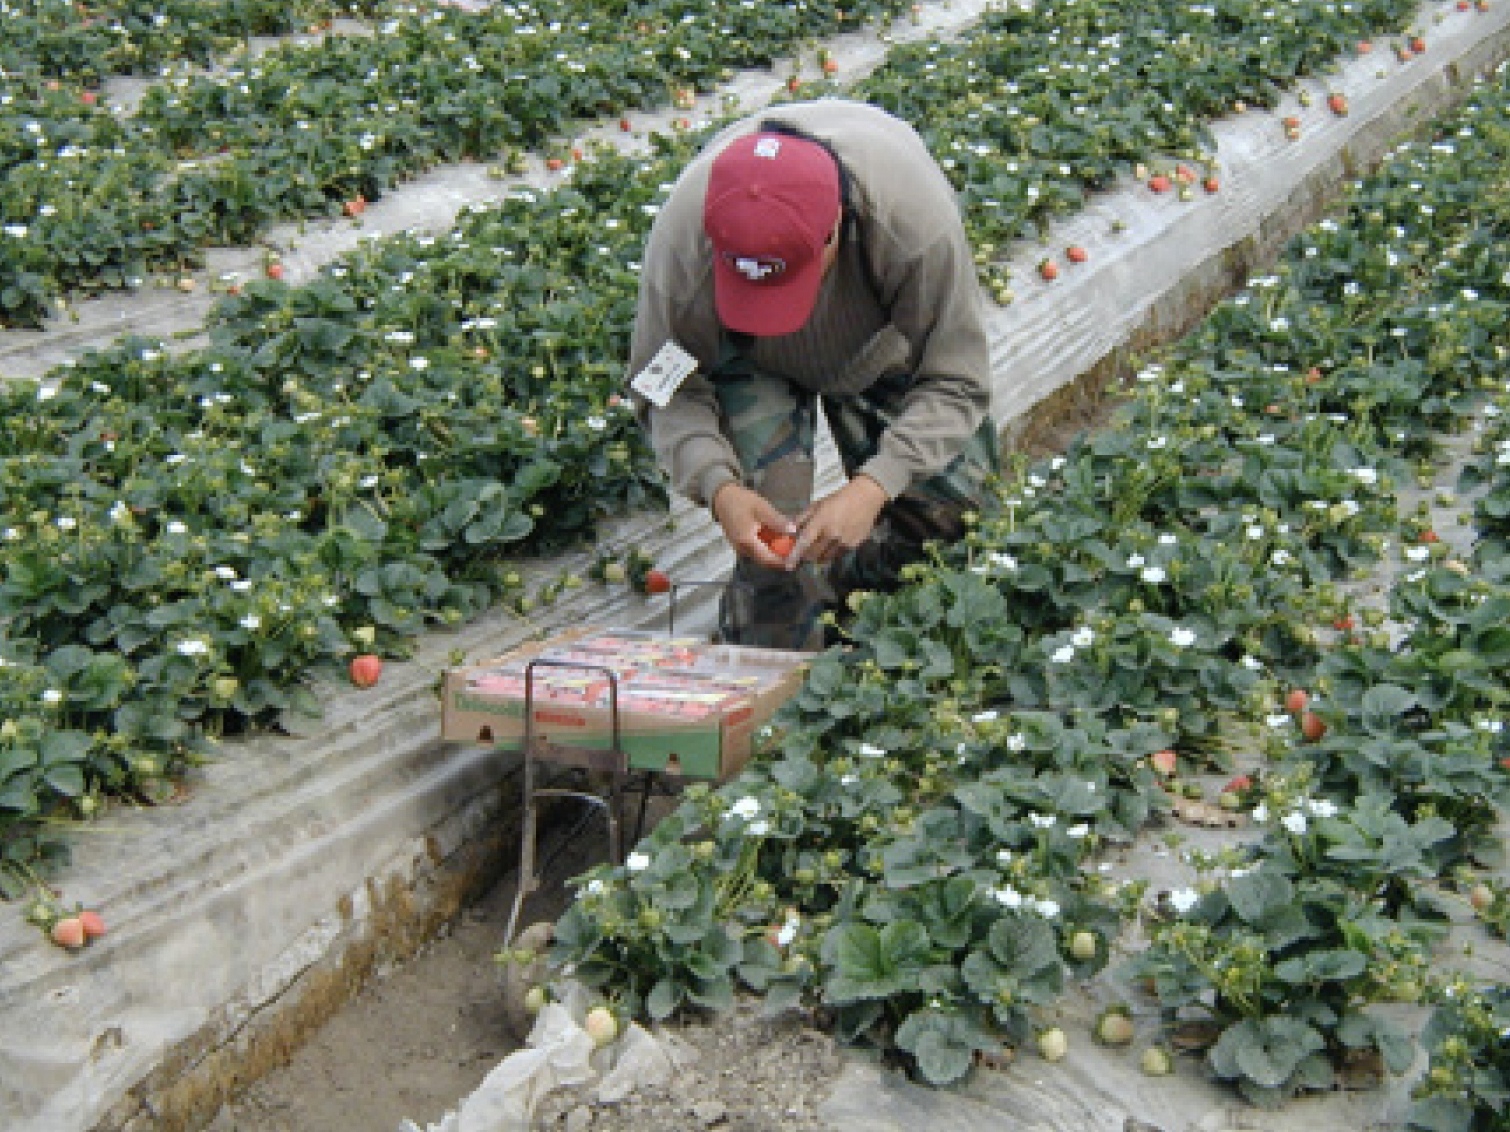 Strawberry harvesters wheel a cart with clamshells between elevated rows